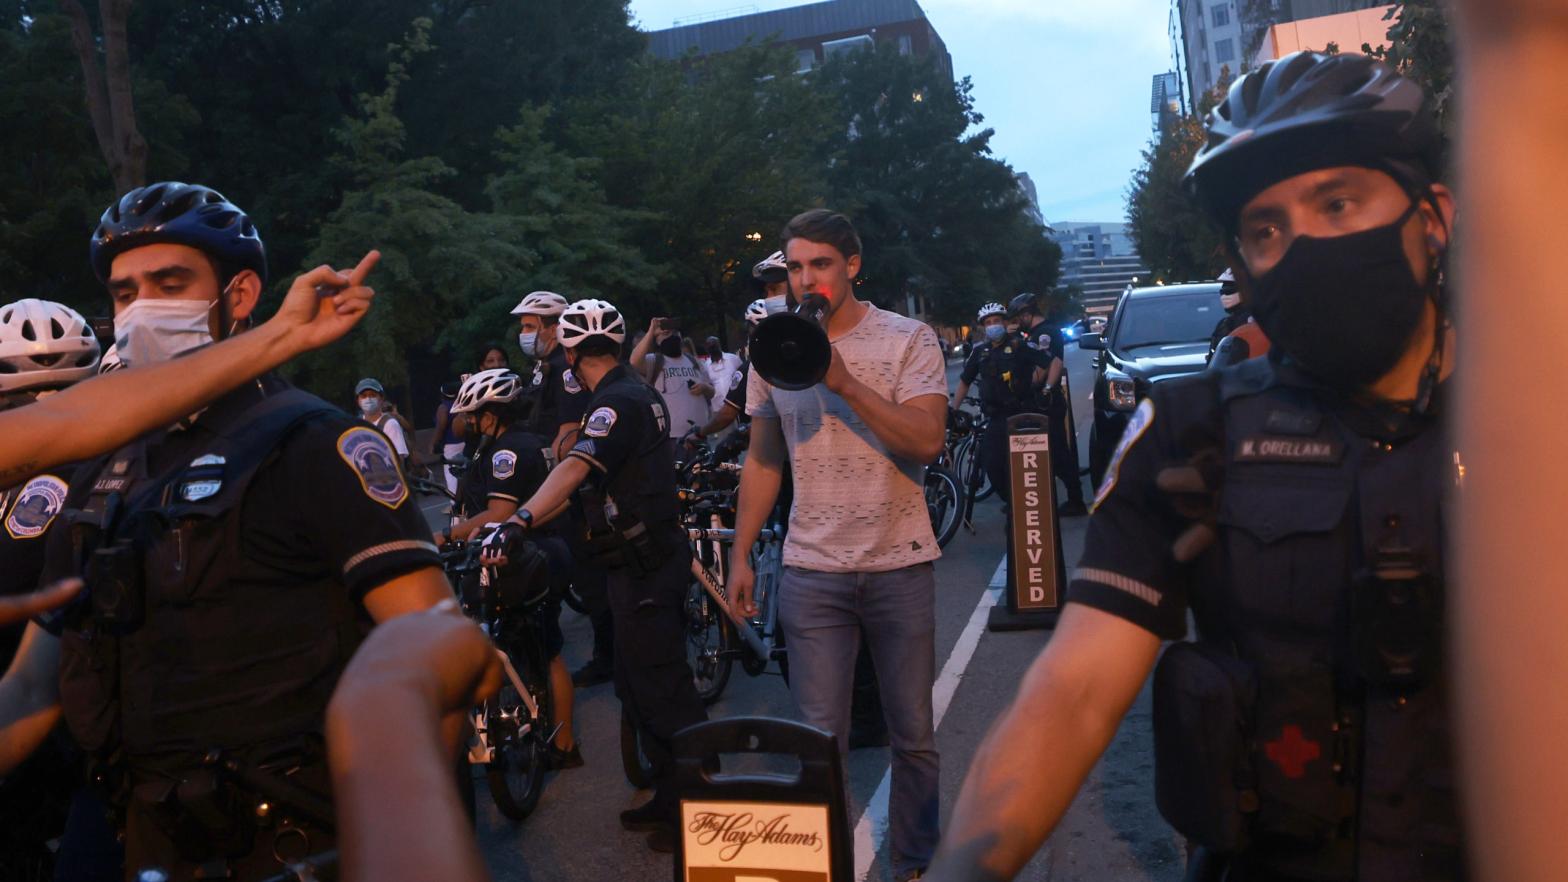 Police surround Jacob Wohl as he taunts protesters in DC on Aug. 27, 2020. (Photo: Michael M. Santiago, Getty Images)